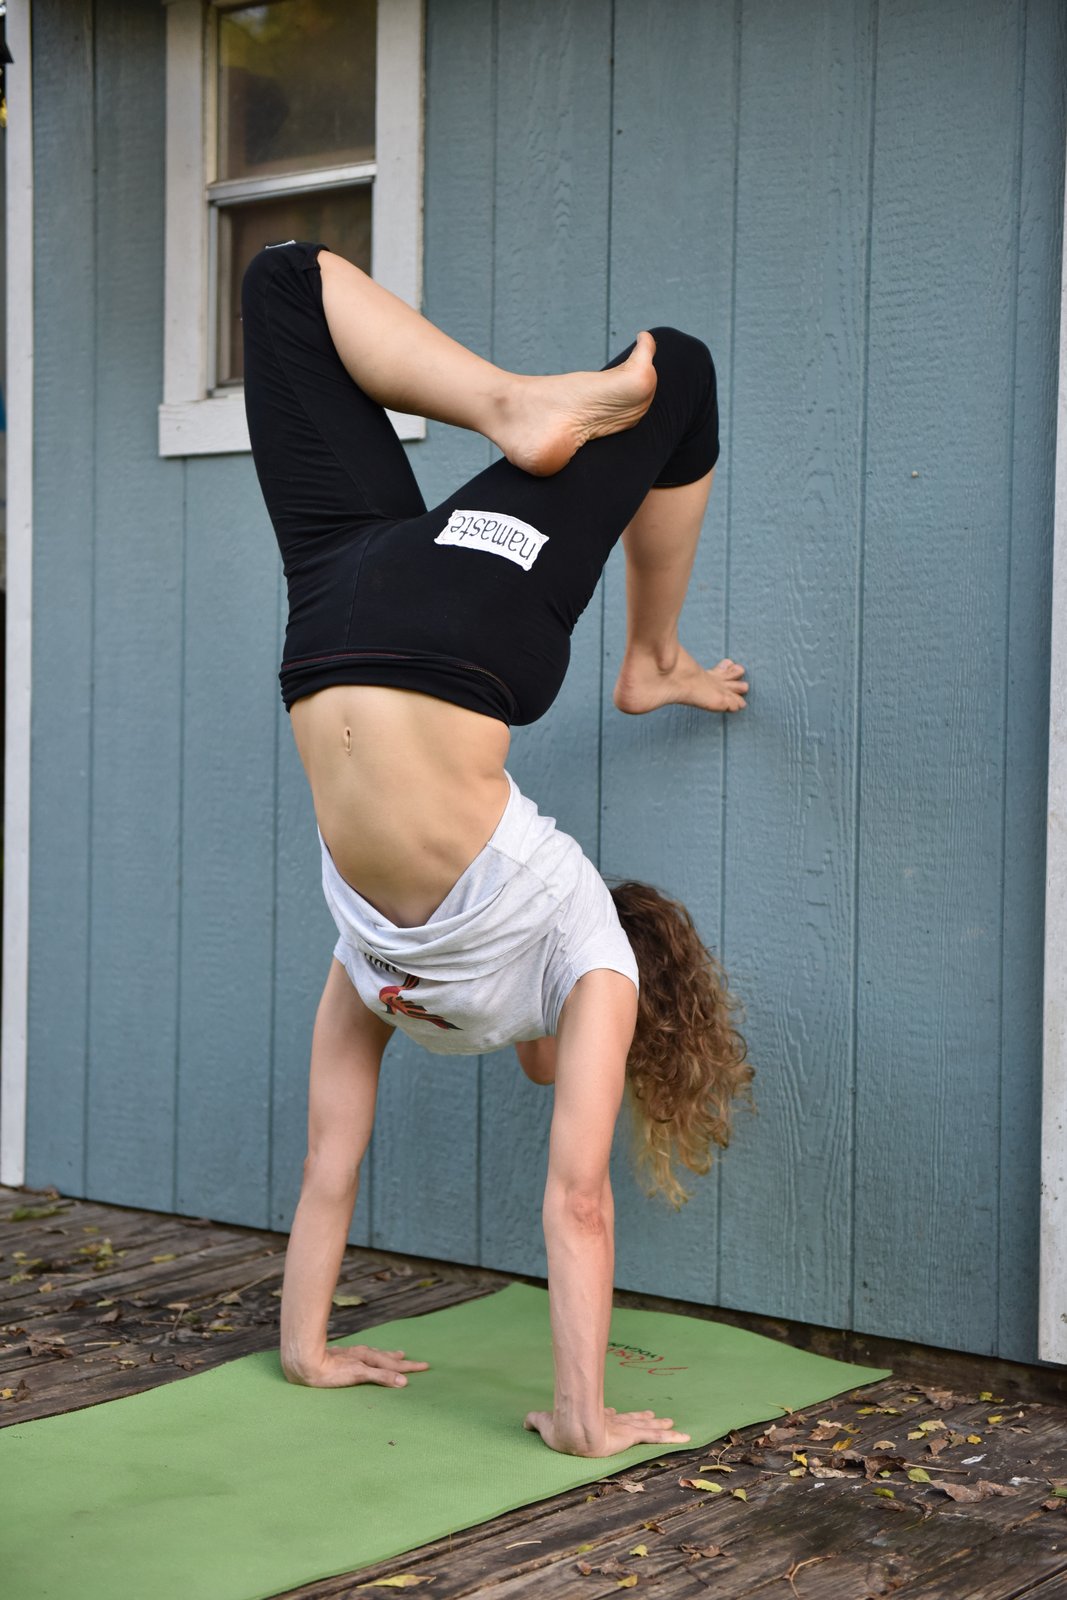 The Essential Components of a Handstand – OmStars